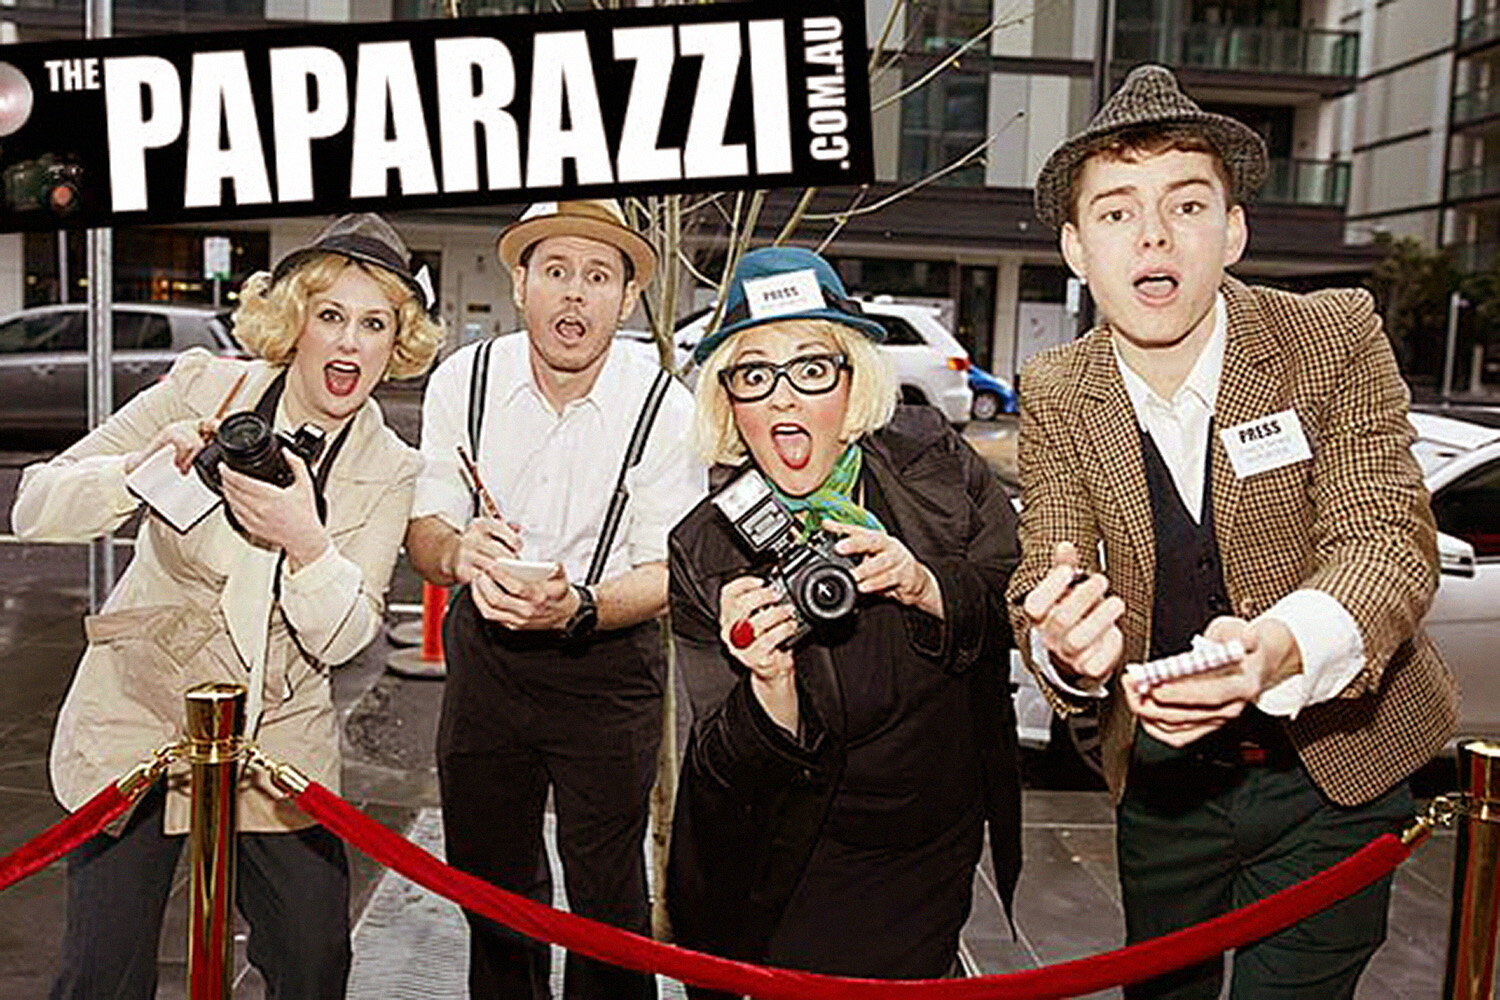 Surprise your guests and invite stylish, comical and engaging paparazzi to your party.